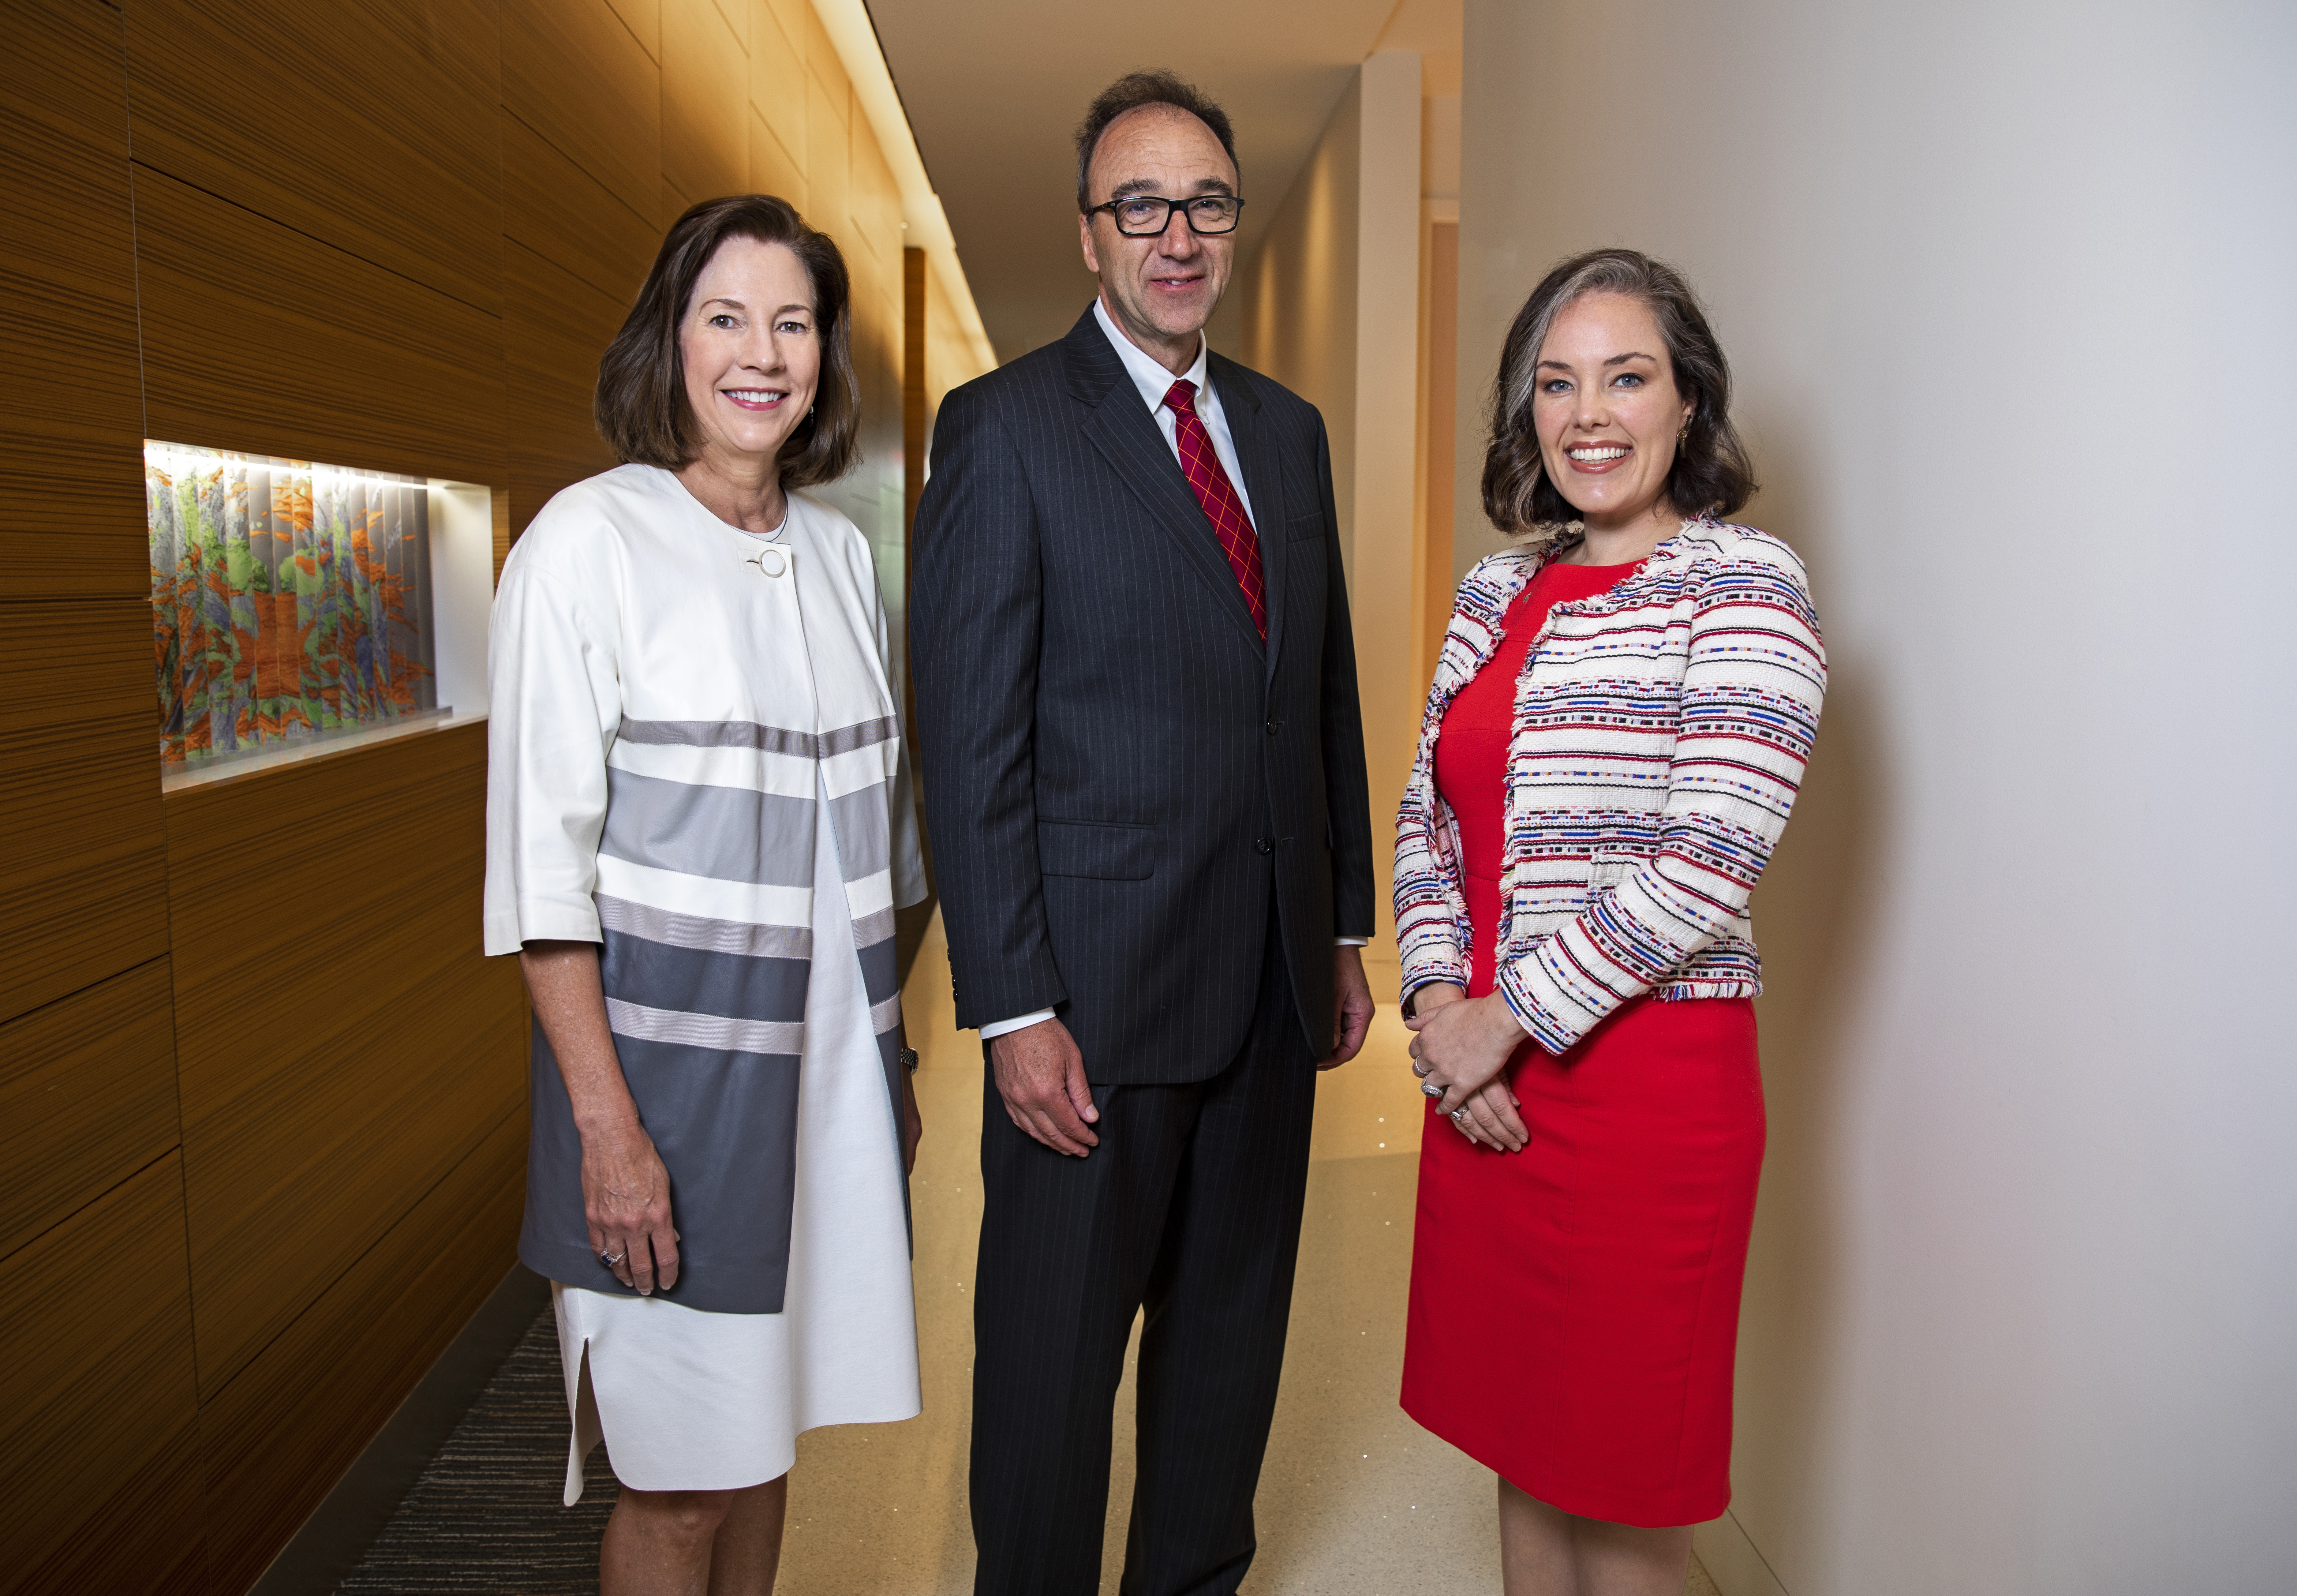 Lynne Doughtie, Horacio Valeiras, and Morgan Blackwood Patel are tri-chairs of Boundless Impact: The Campaign for Virginia Tech.